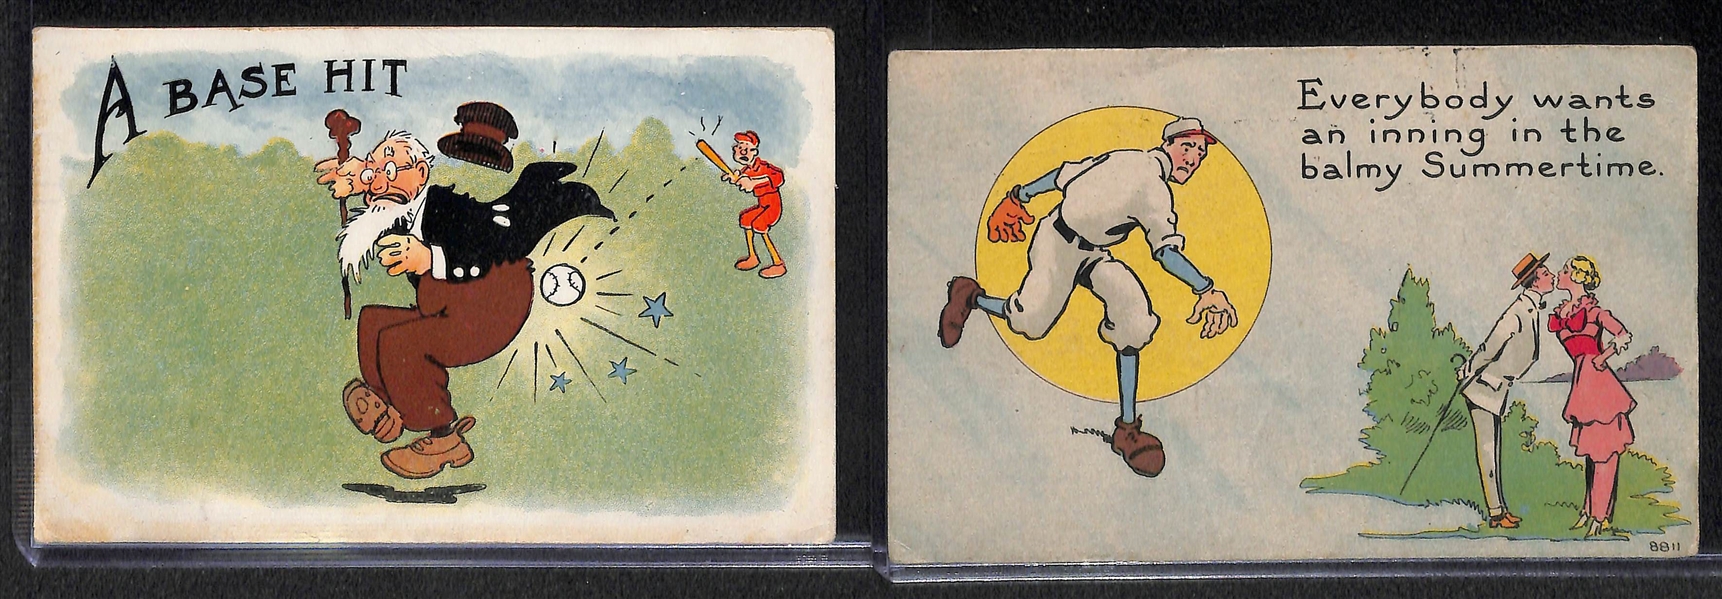 Lot of (8) RARE Early 1900s Baseball Related Post Cards - Cartoon Themed